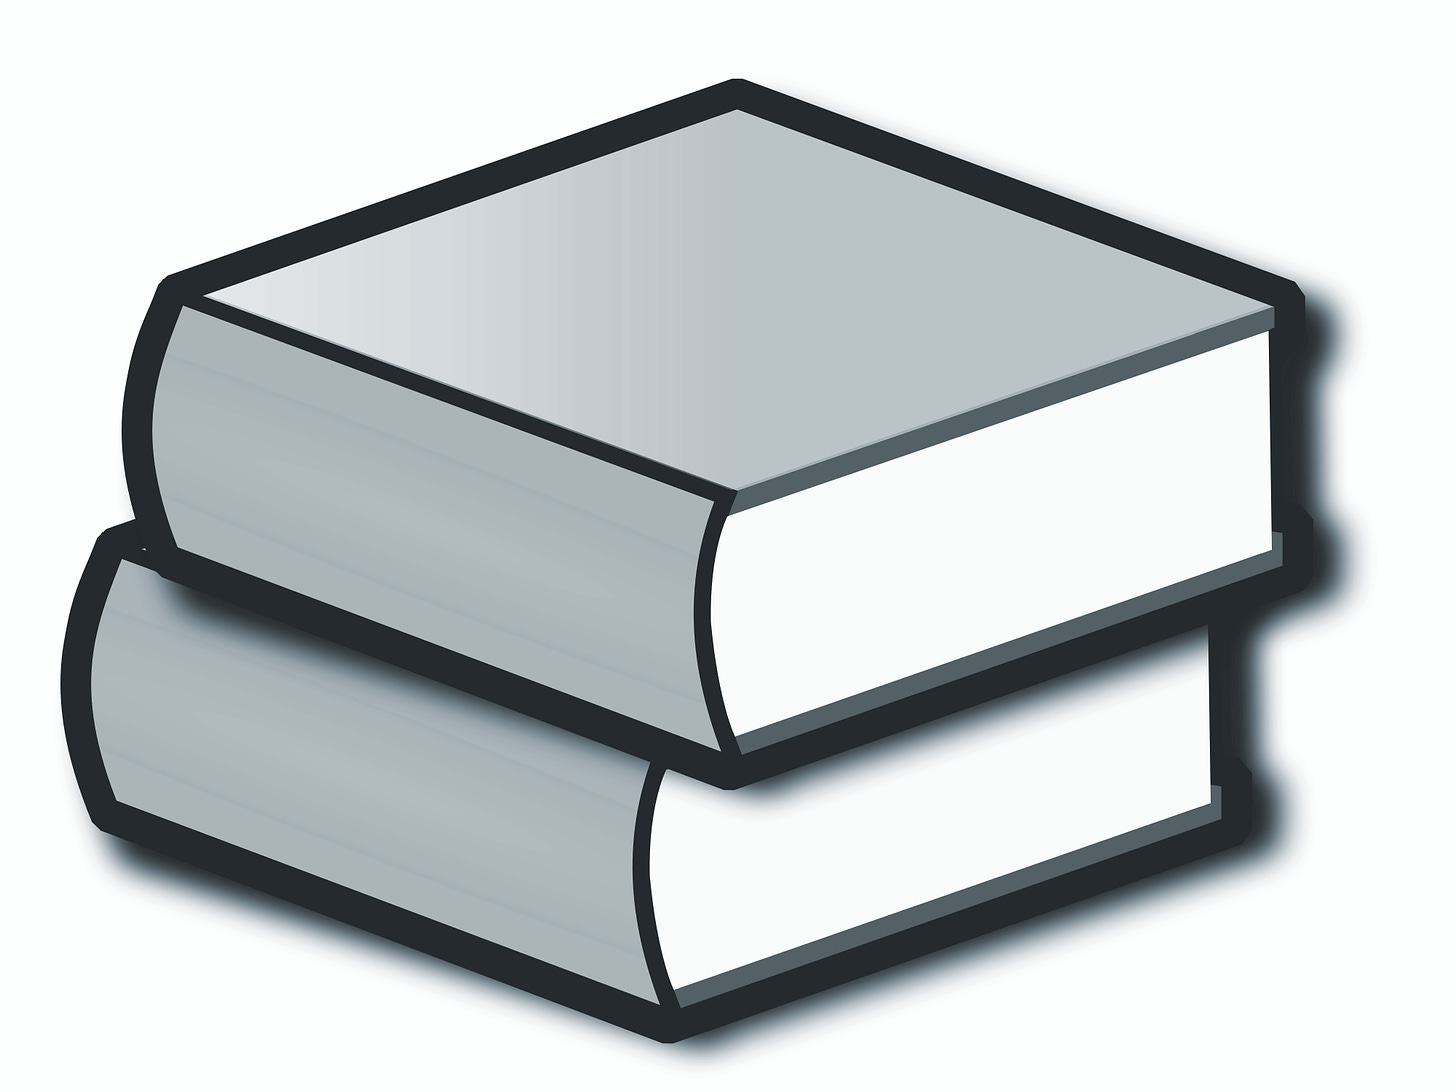 File:2 books silver.png - Wikimedia Commons